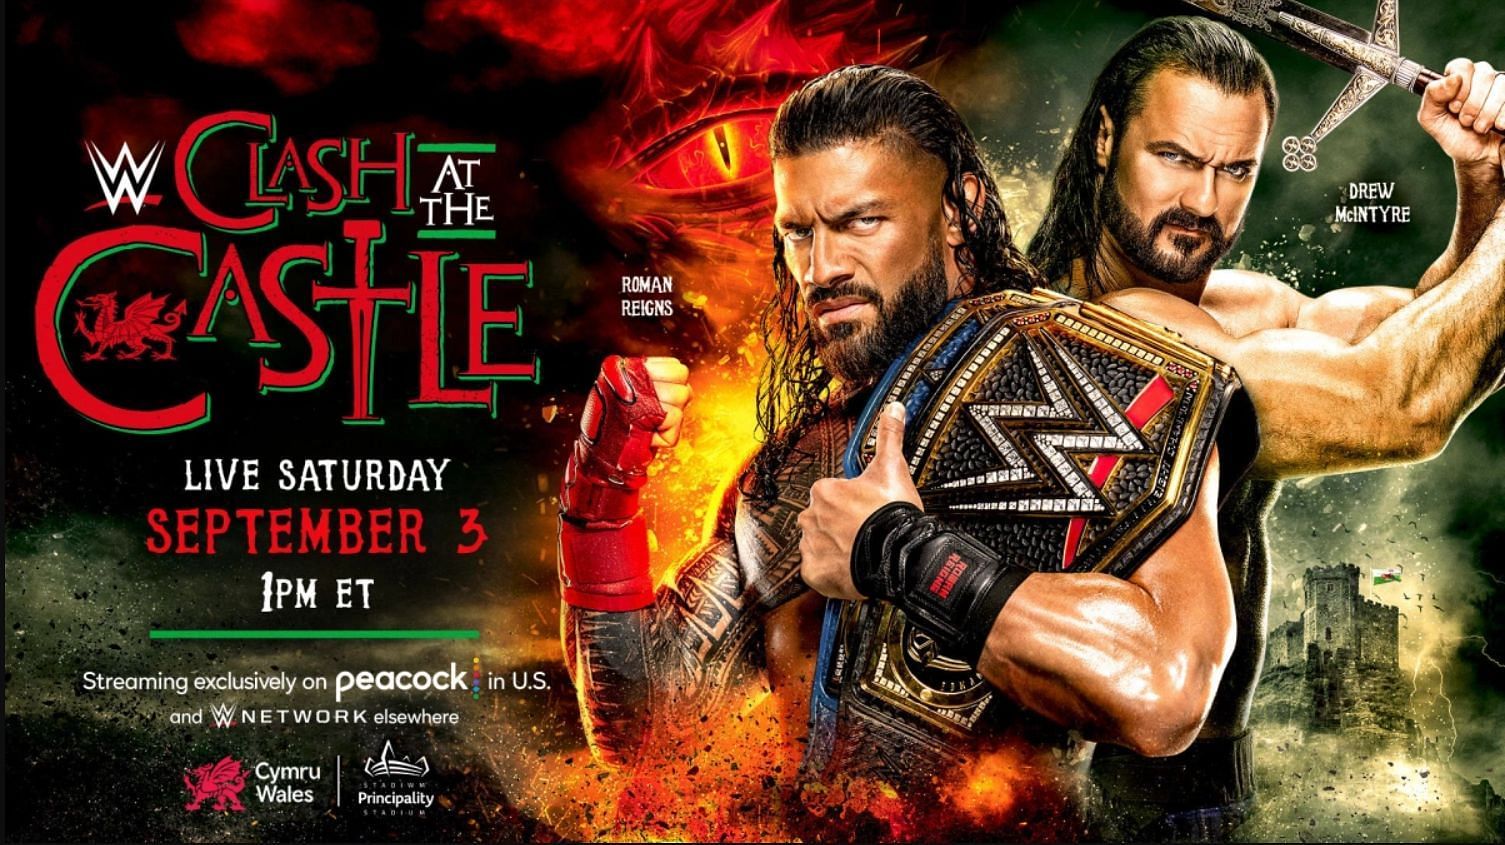 WWE Clash at the Castle is right around the corner